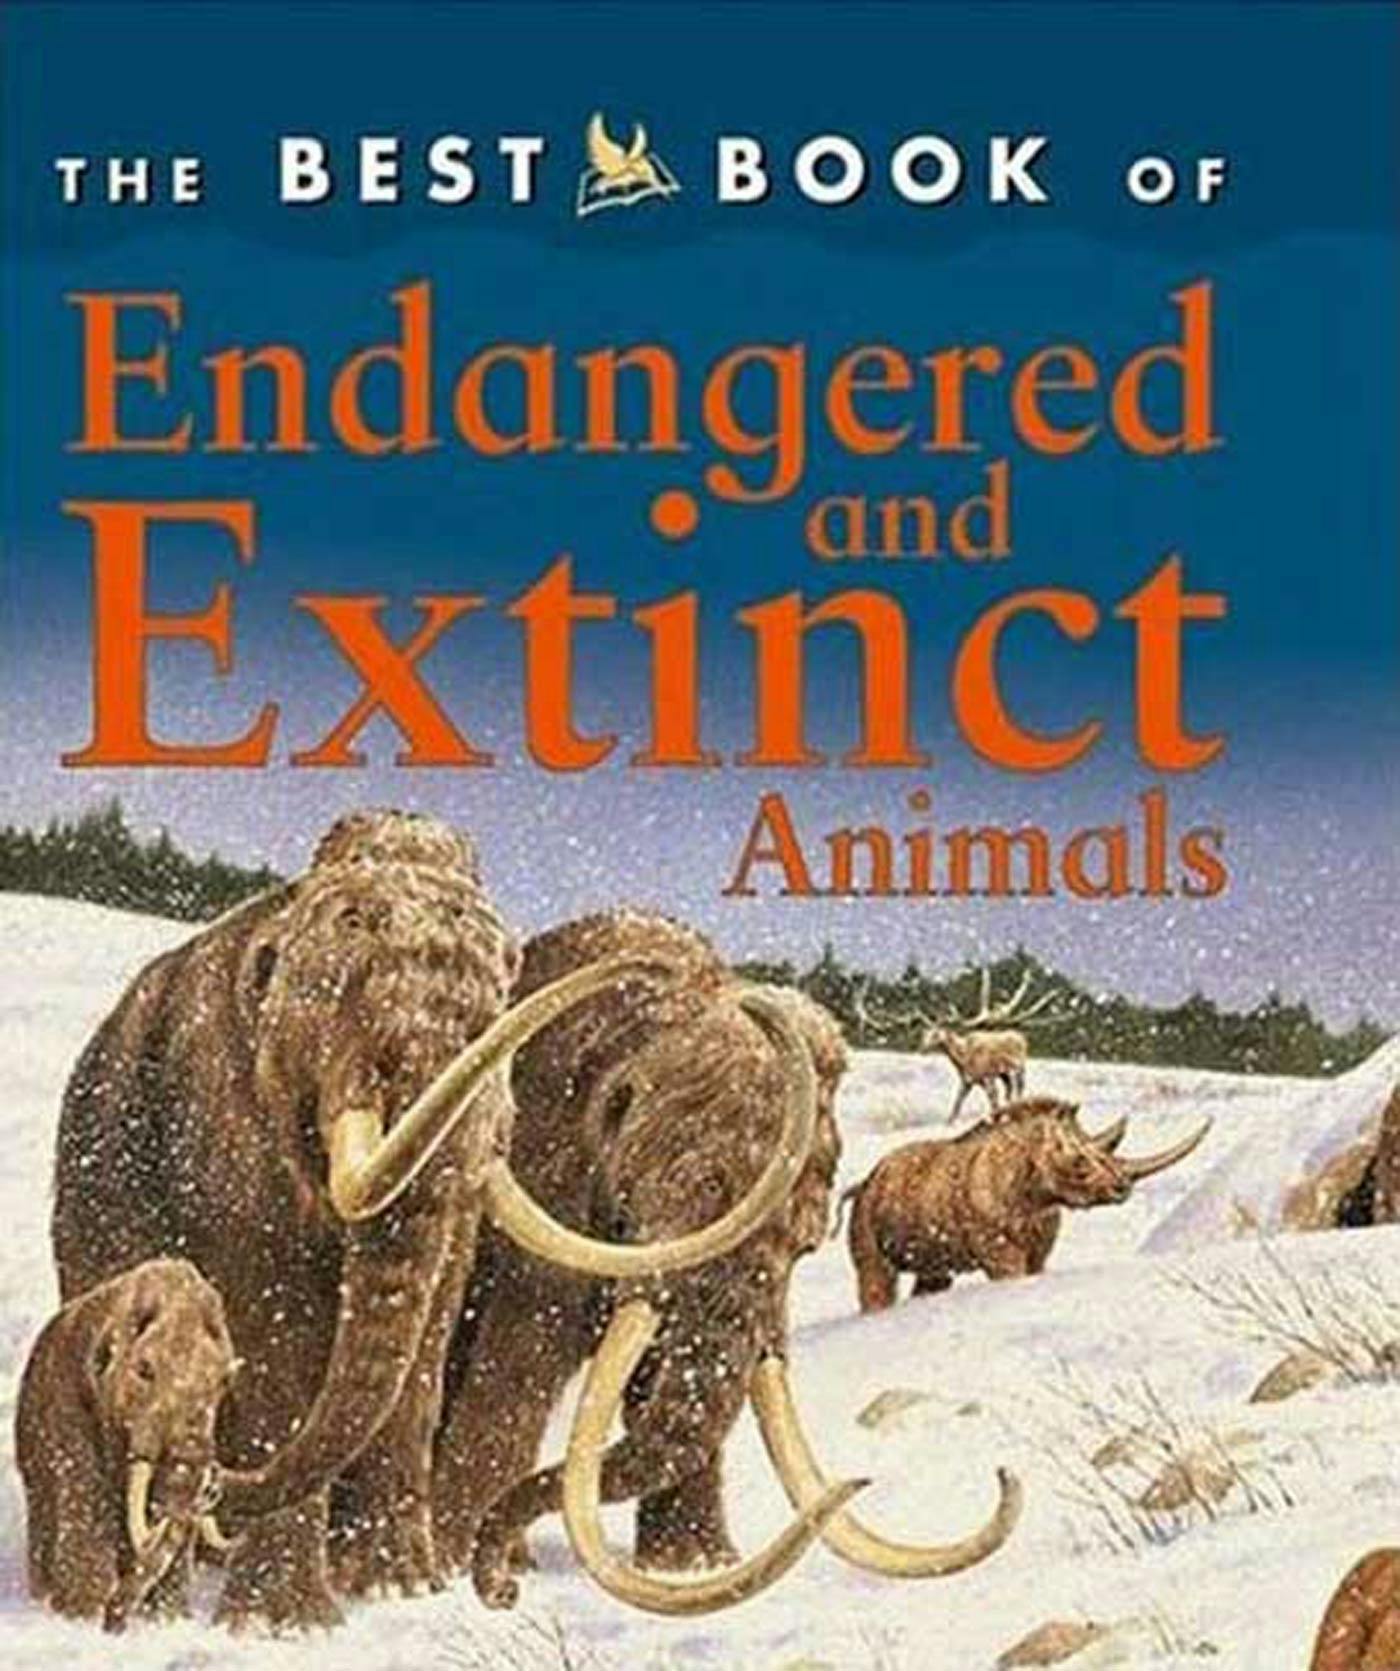 The Best Book of Endangered and Extinct Animals